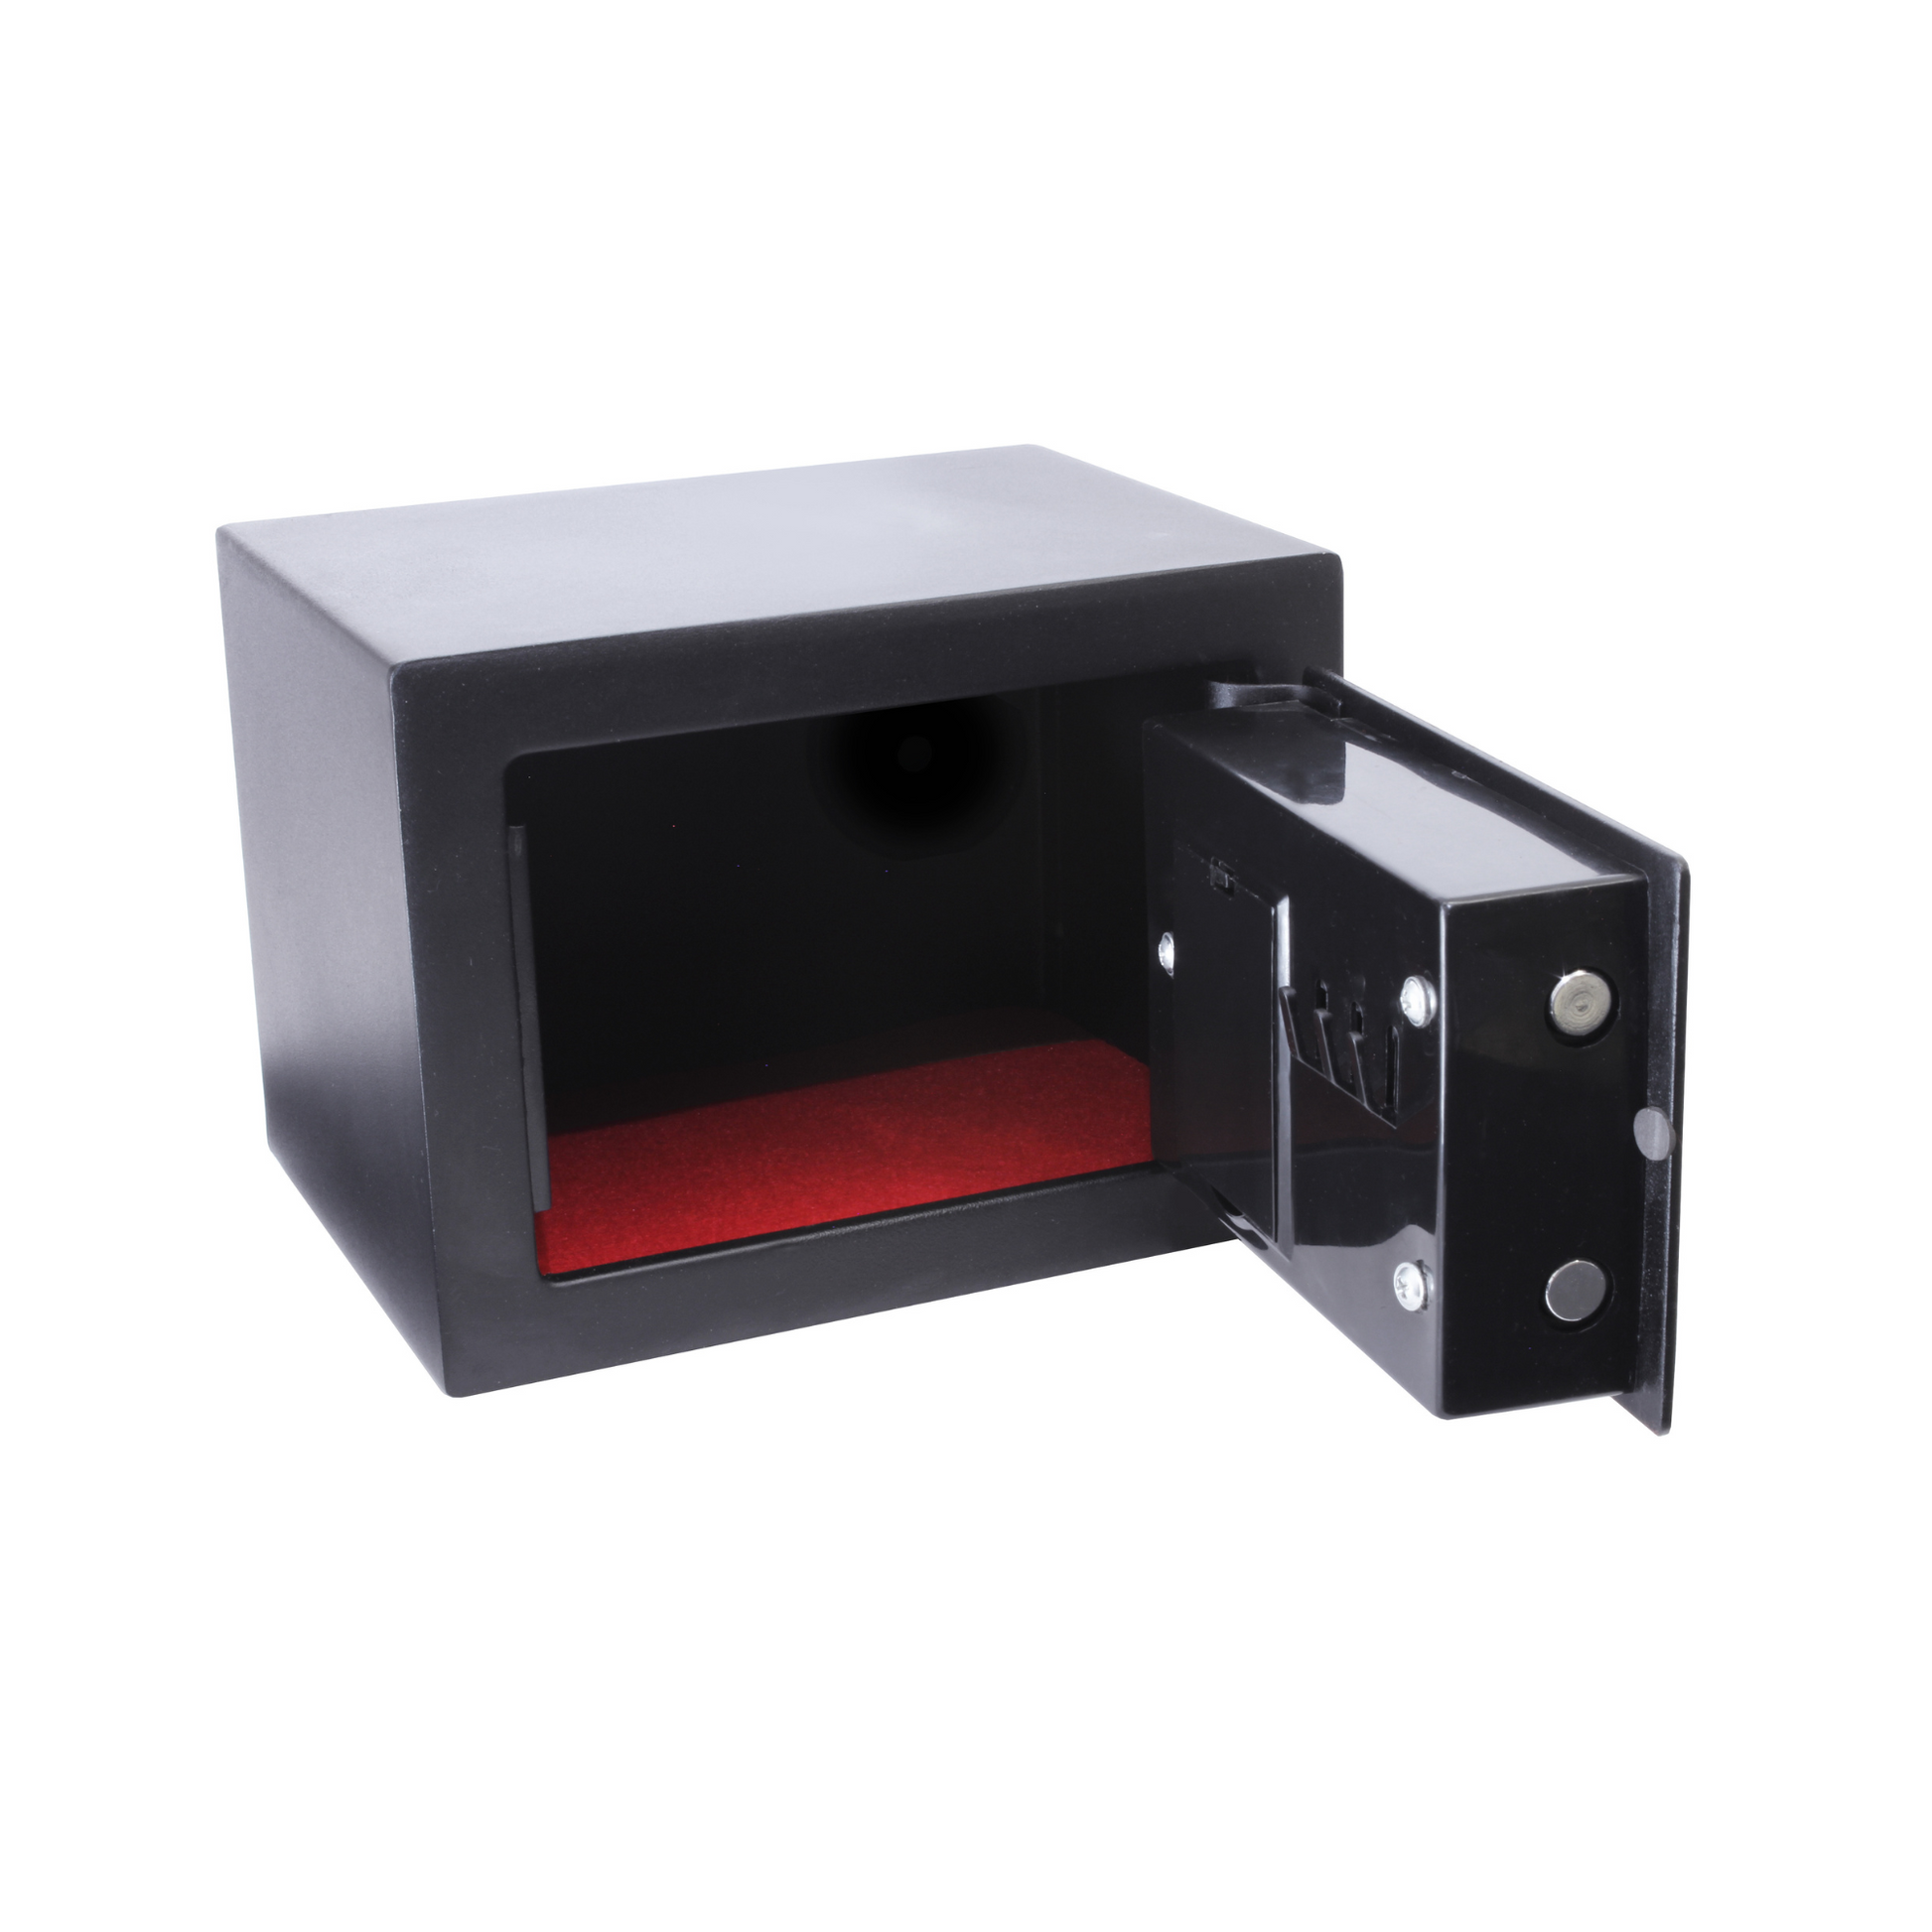 Cathedral Products EA15 5 Litre Electronic Digital Safe with an open door, showing an empty interior with a red velvet base. The image showcases the safe's robust black exterior and double locking bolts, suitable for safeguarding valuables at home or in the office.